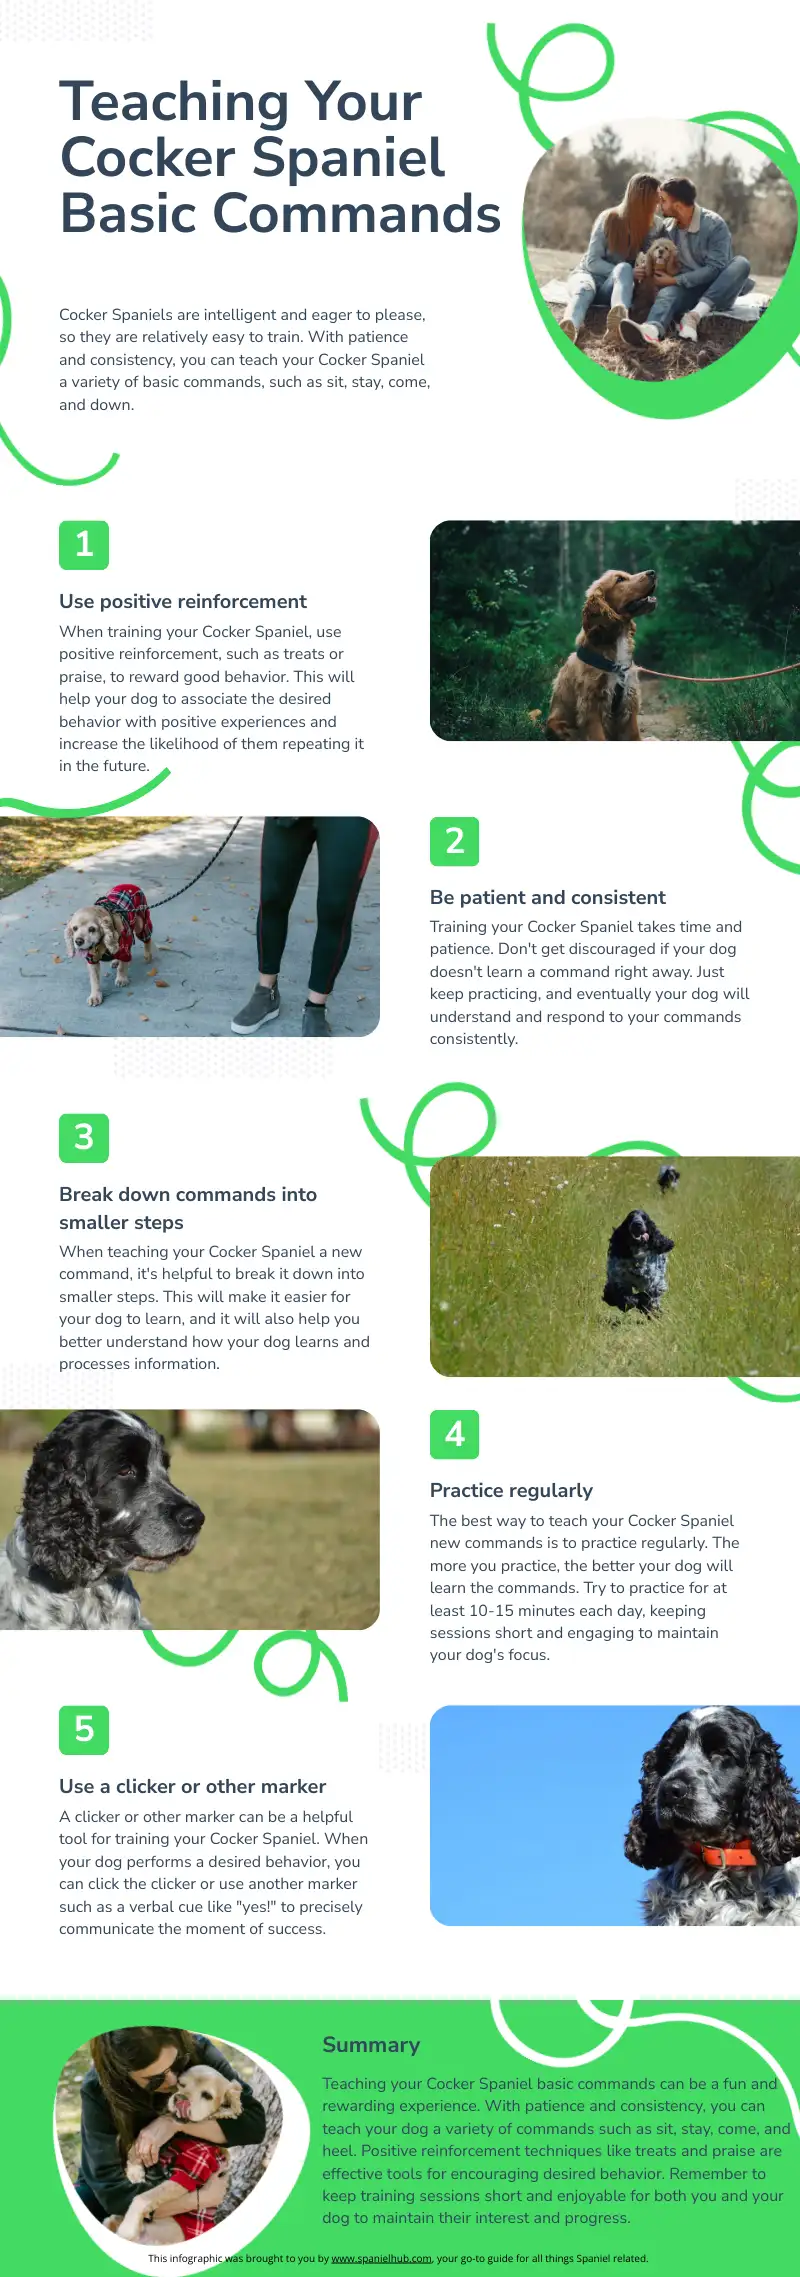 An informative infographic all about teaching your Cocker Spaniel basic commands